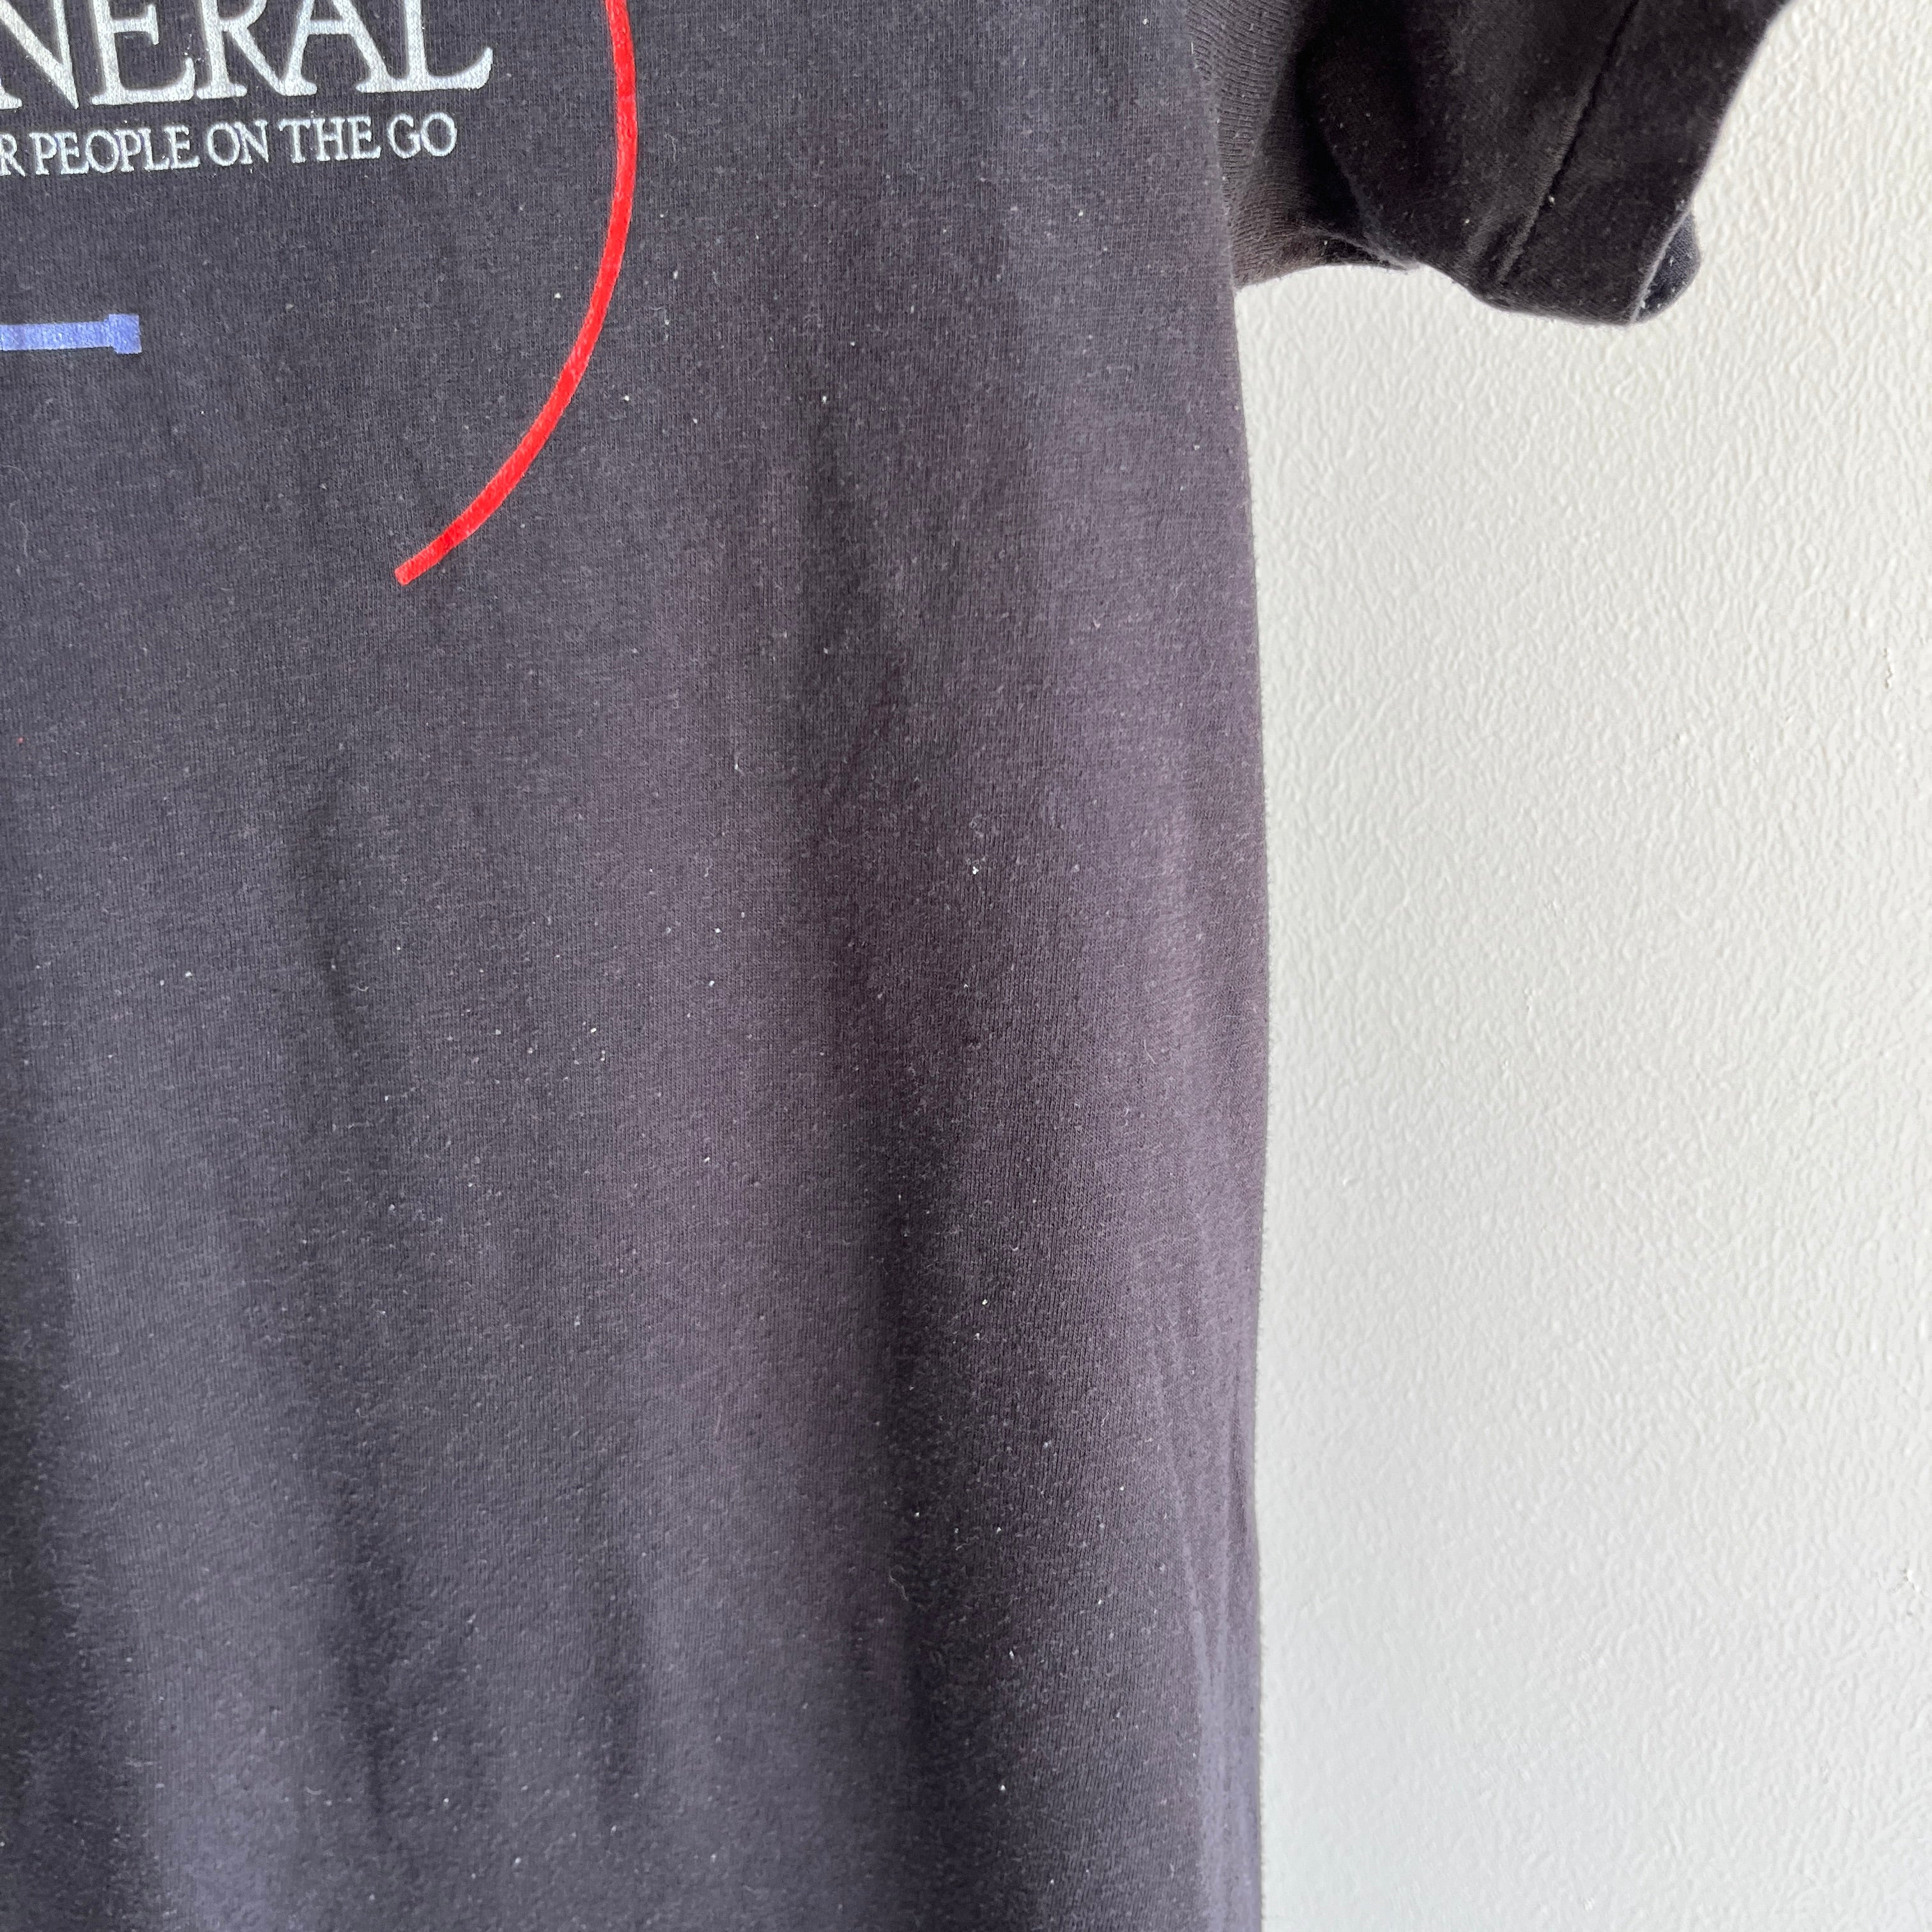 1980s One Data General - The Personal System for People On The Go - Super 80s Generic T-Shirt